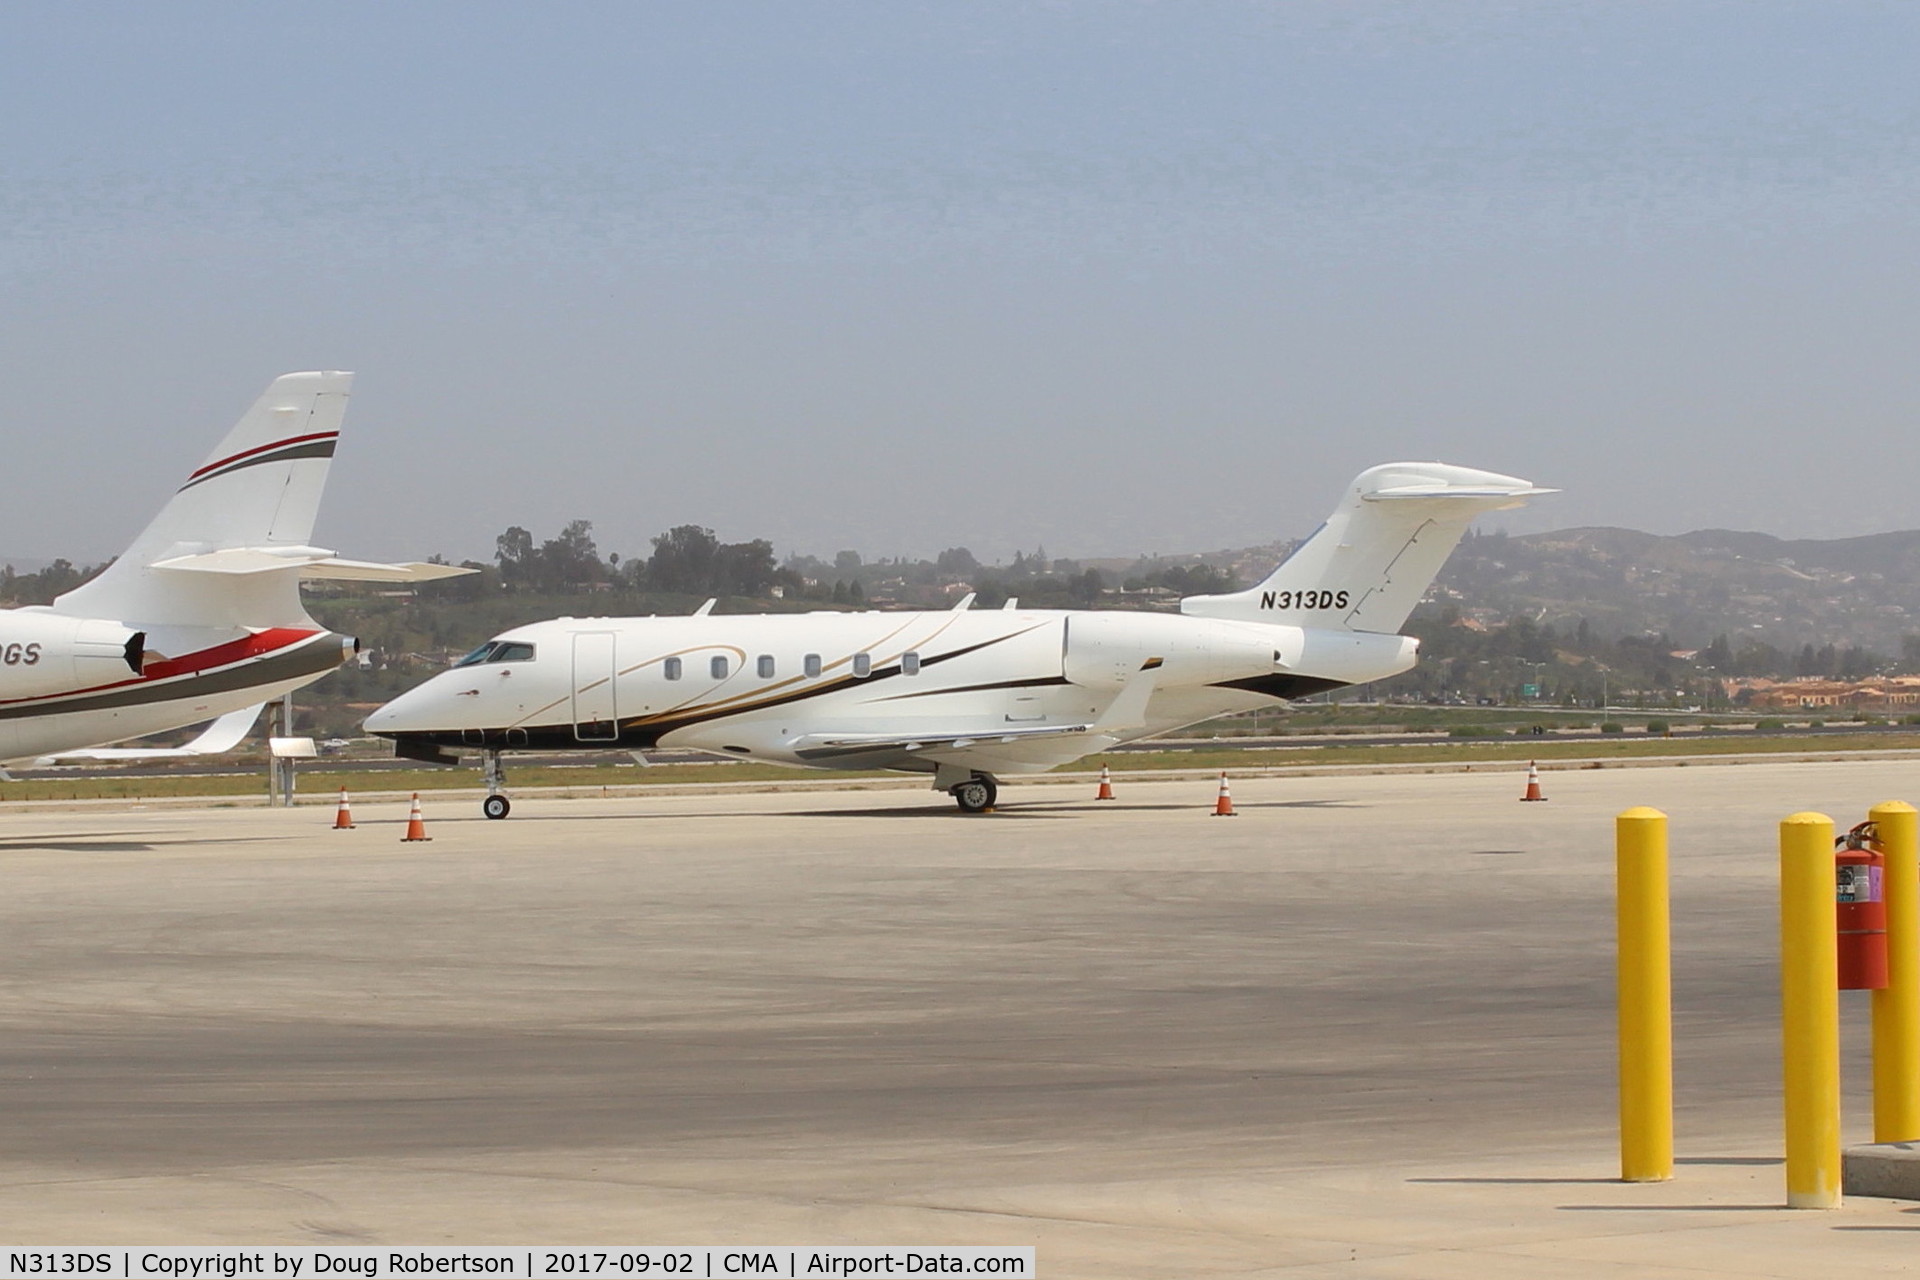 N313DS, 2007 Bombardier Challenger 300 (BD-100-1A10) C/N 20183, 2007 Bombardier CHALLENGER 300 (BD-100-1A10), two Honeywell AS907-1-1A turbofans with FADEC, flat-rated to 6,500 lb st each. At SUN AIR ramp.